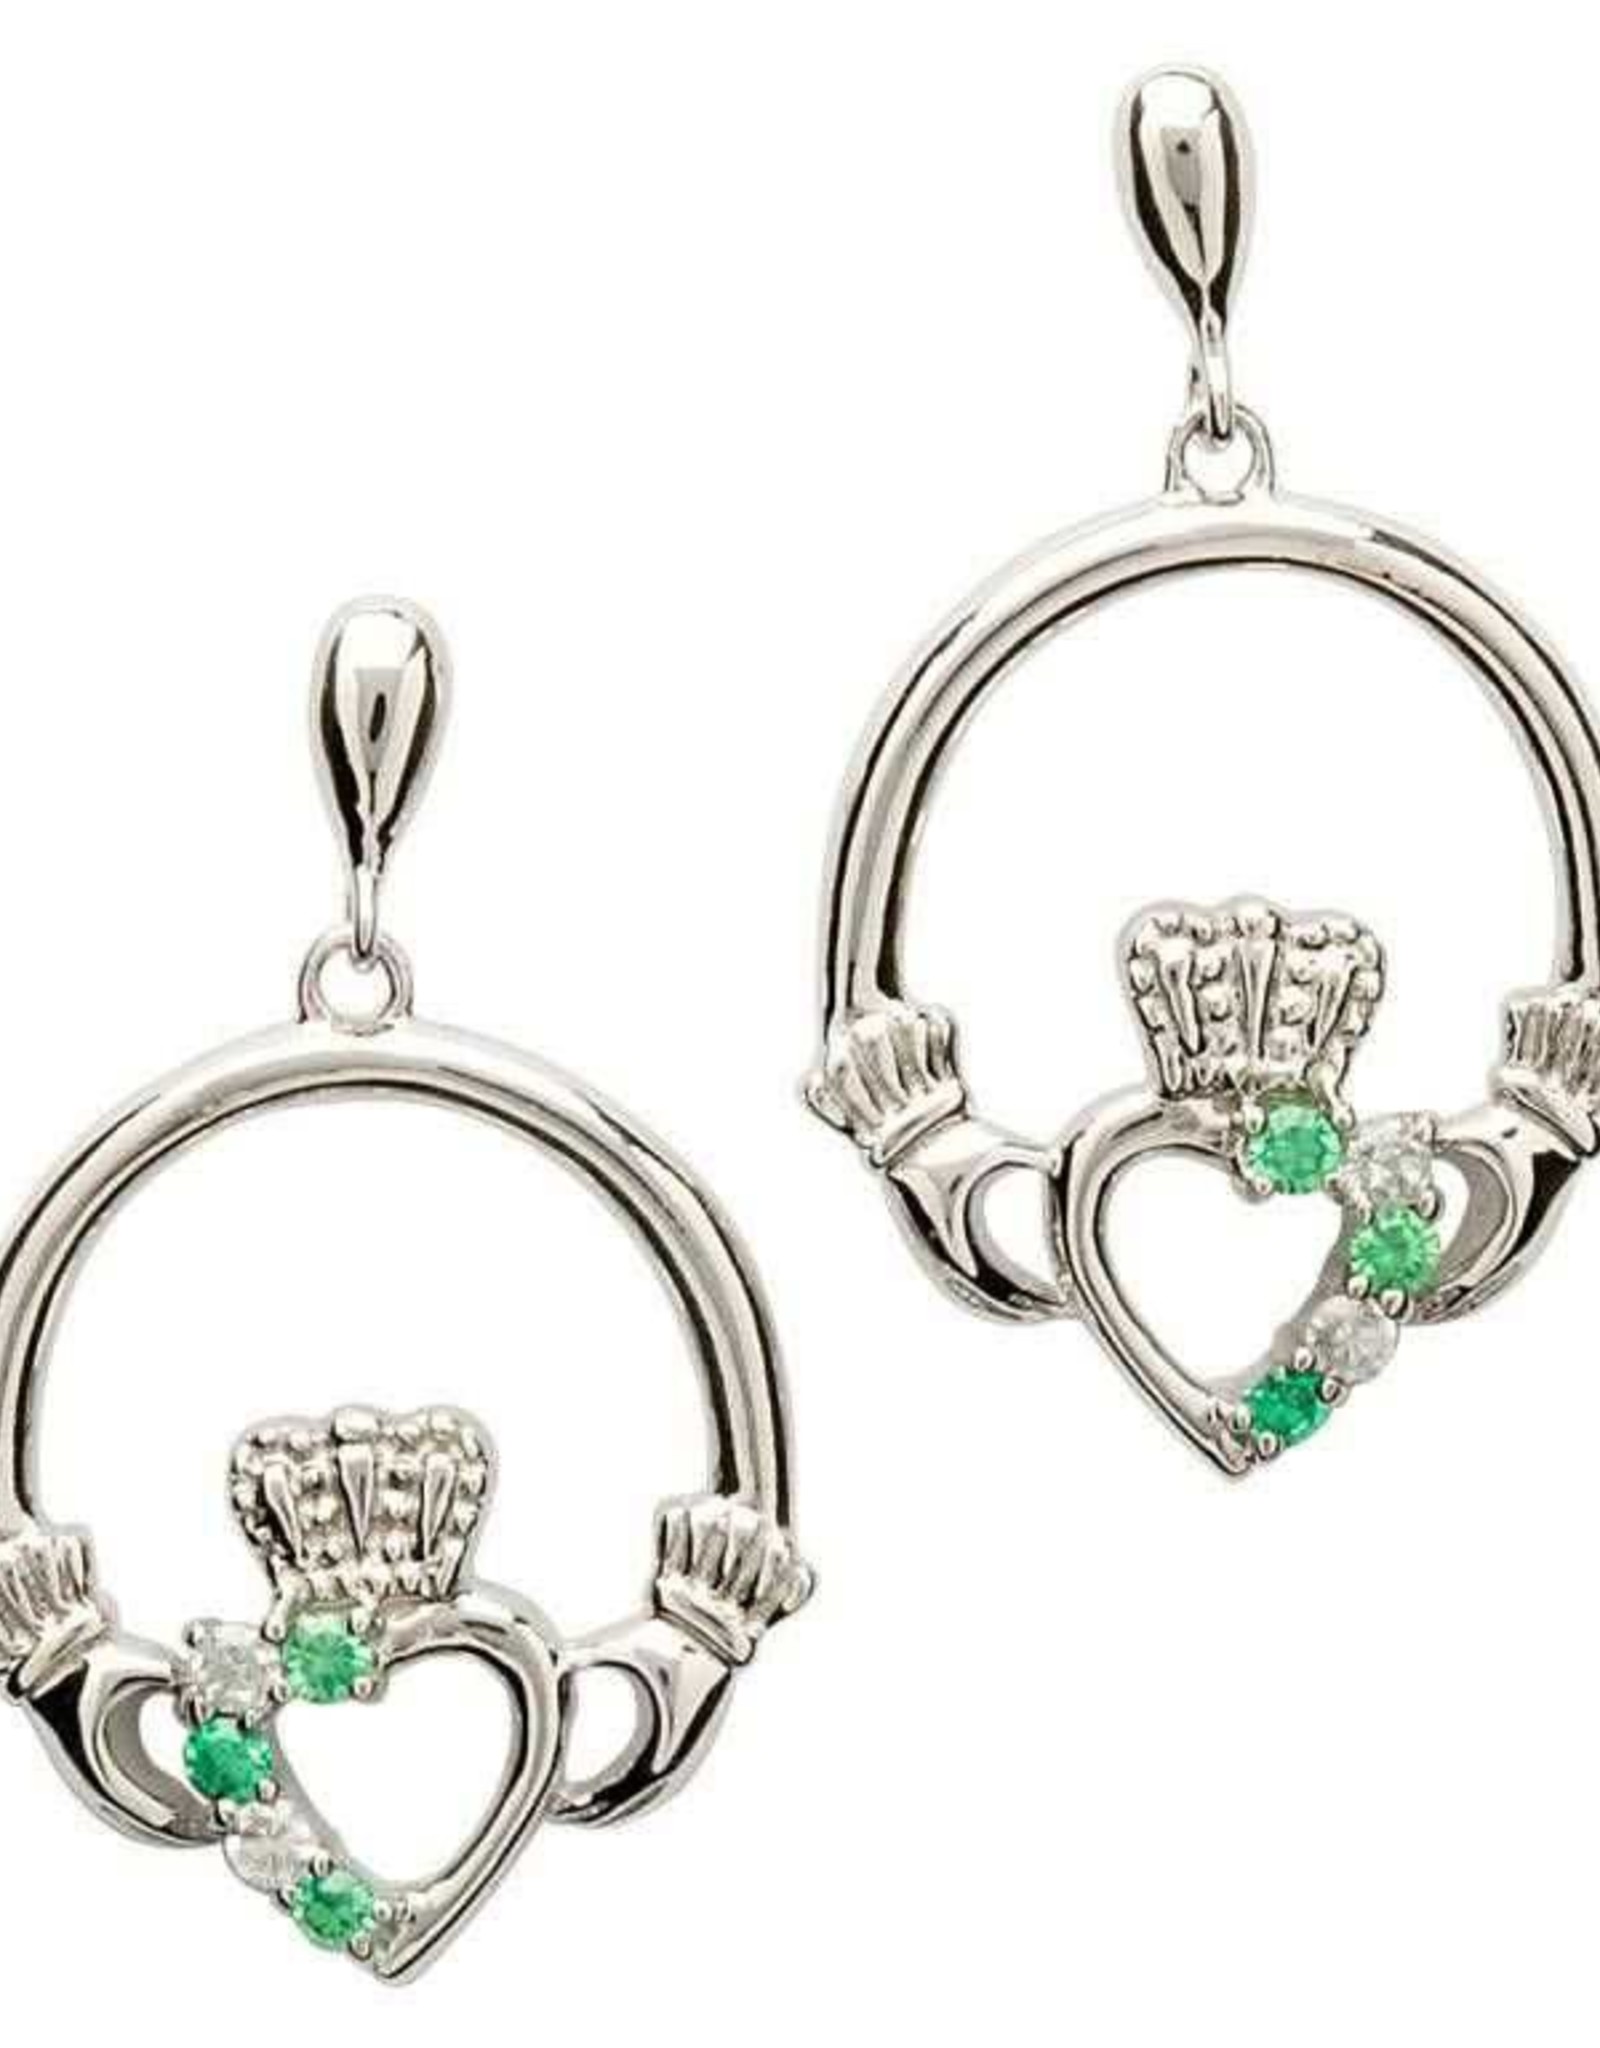 Shanore Claddagh Part Set Silver Earrings